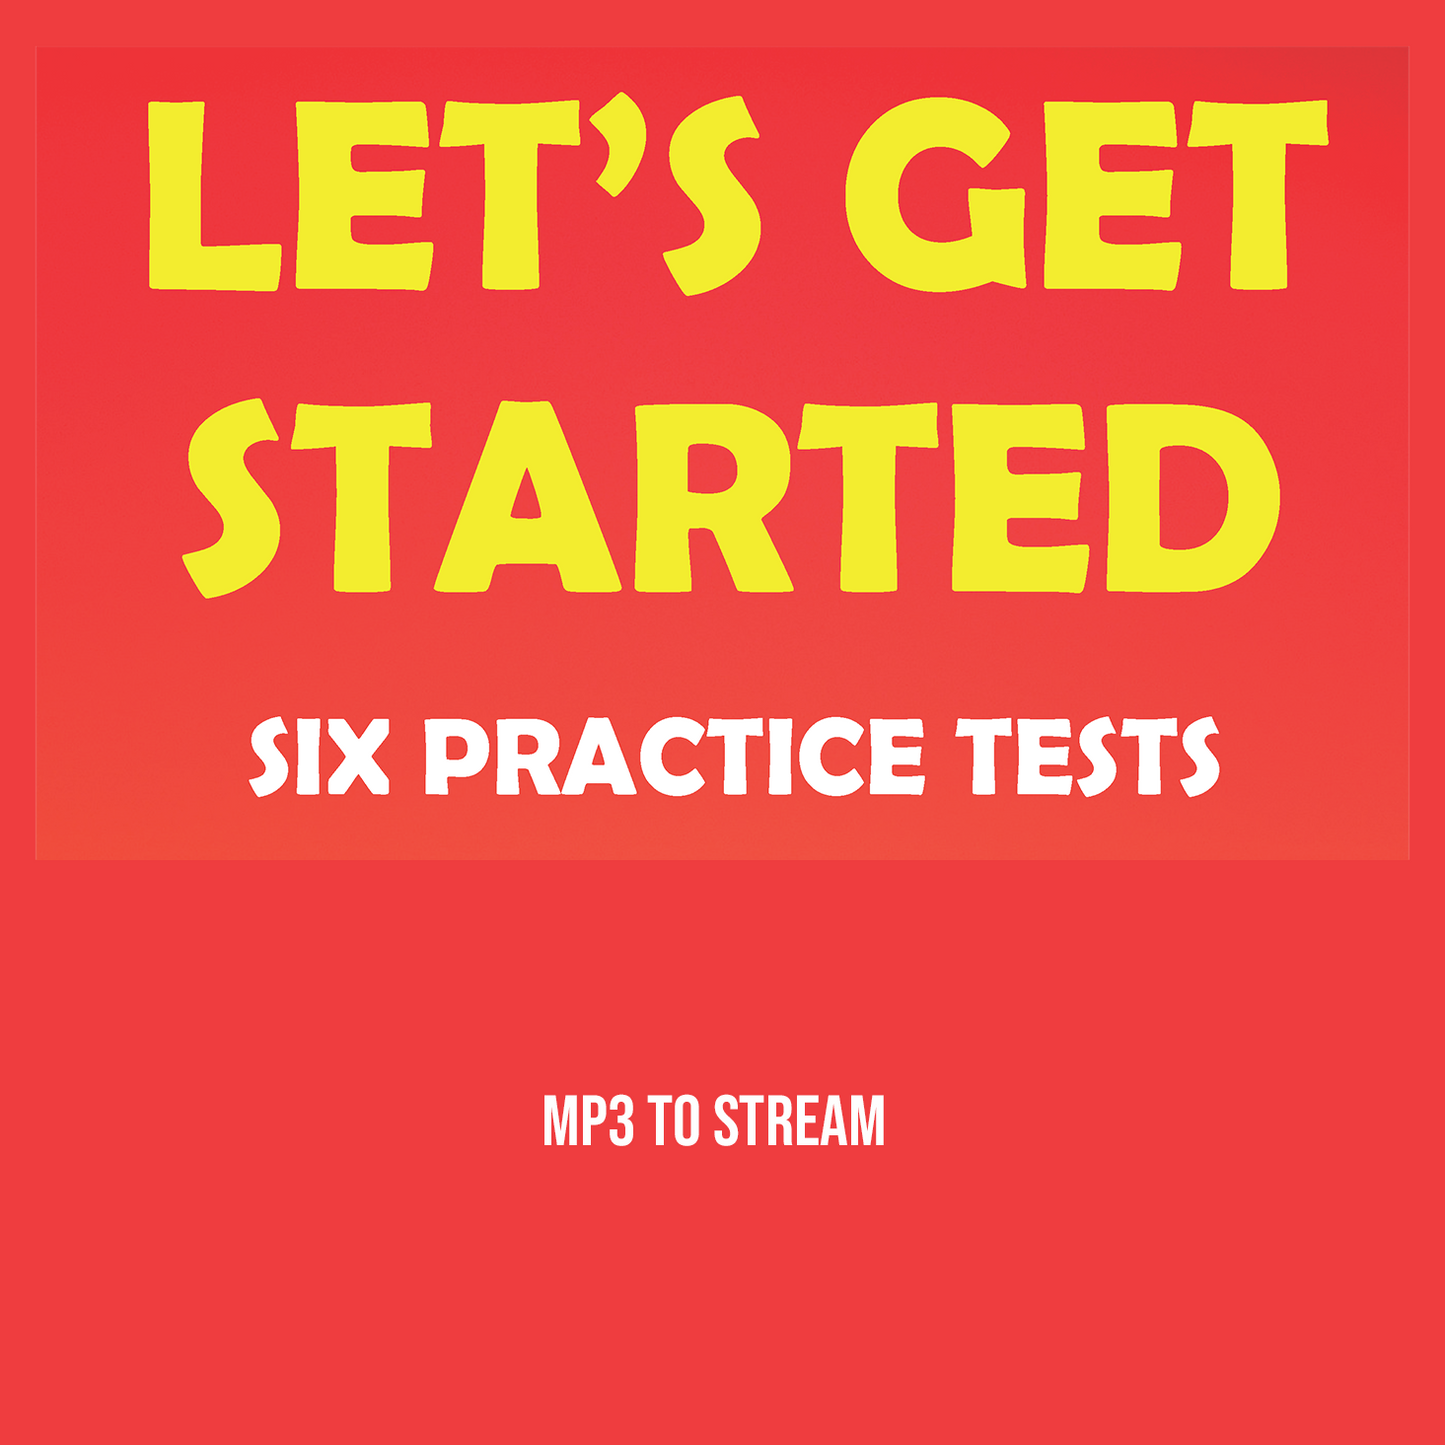 Let's Get Started MP3 Audio (to stream)